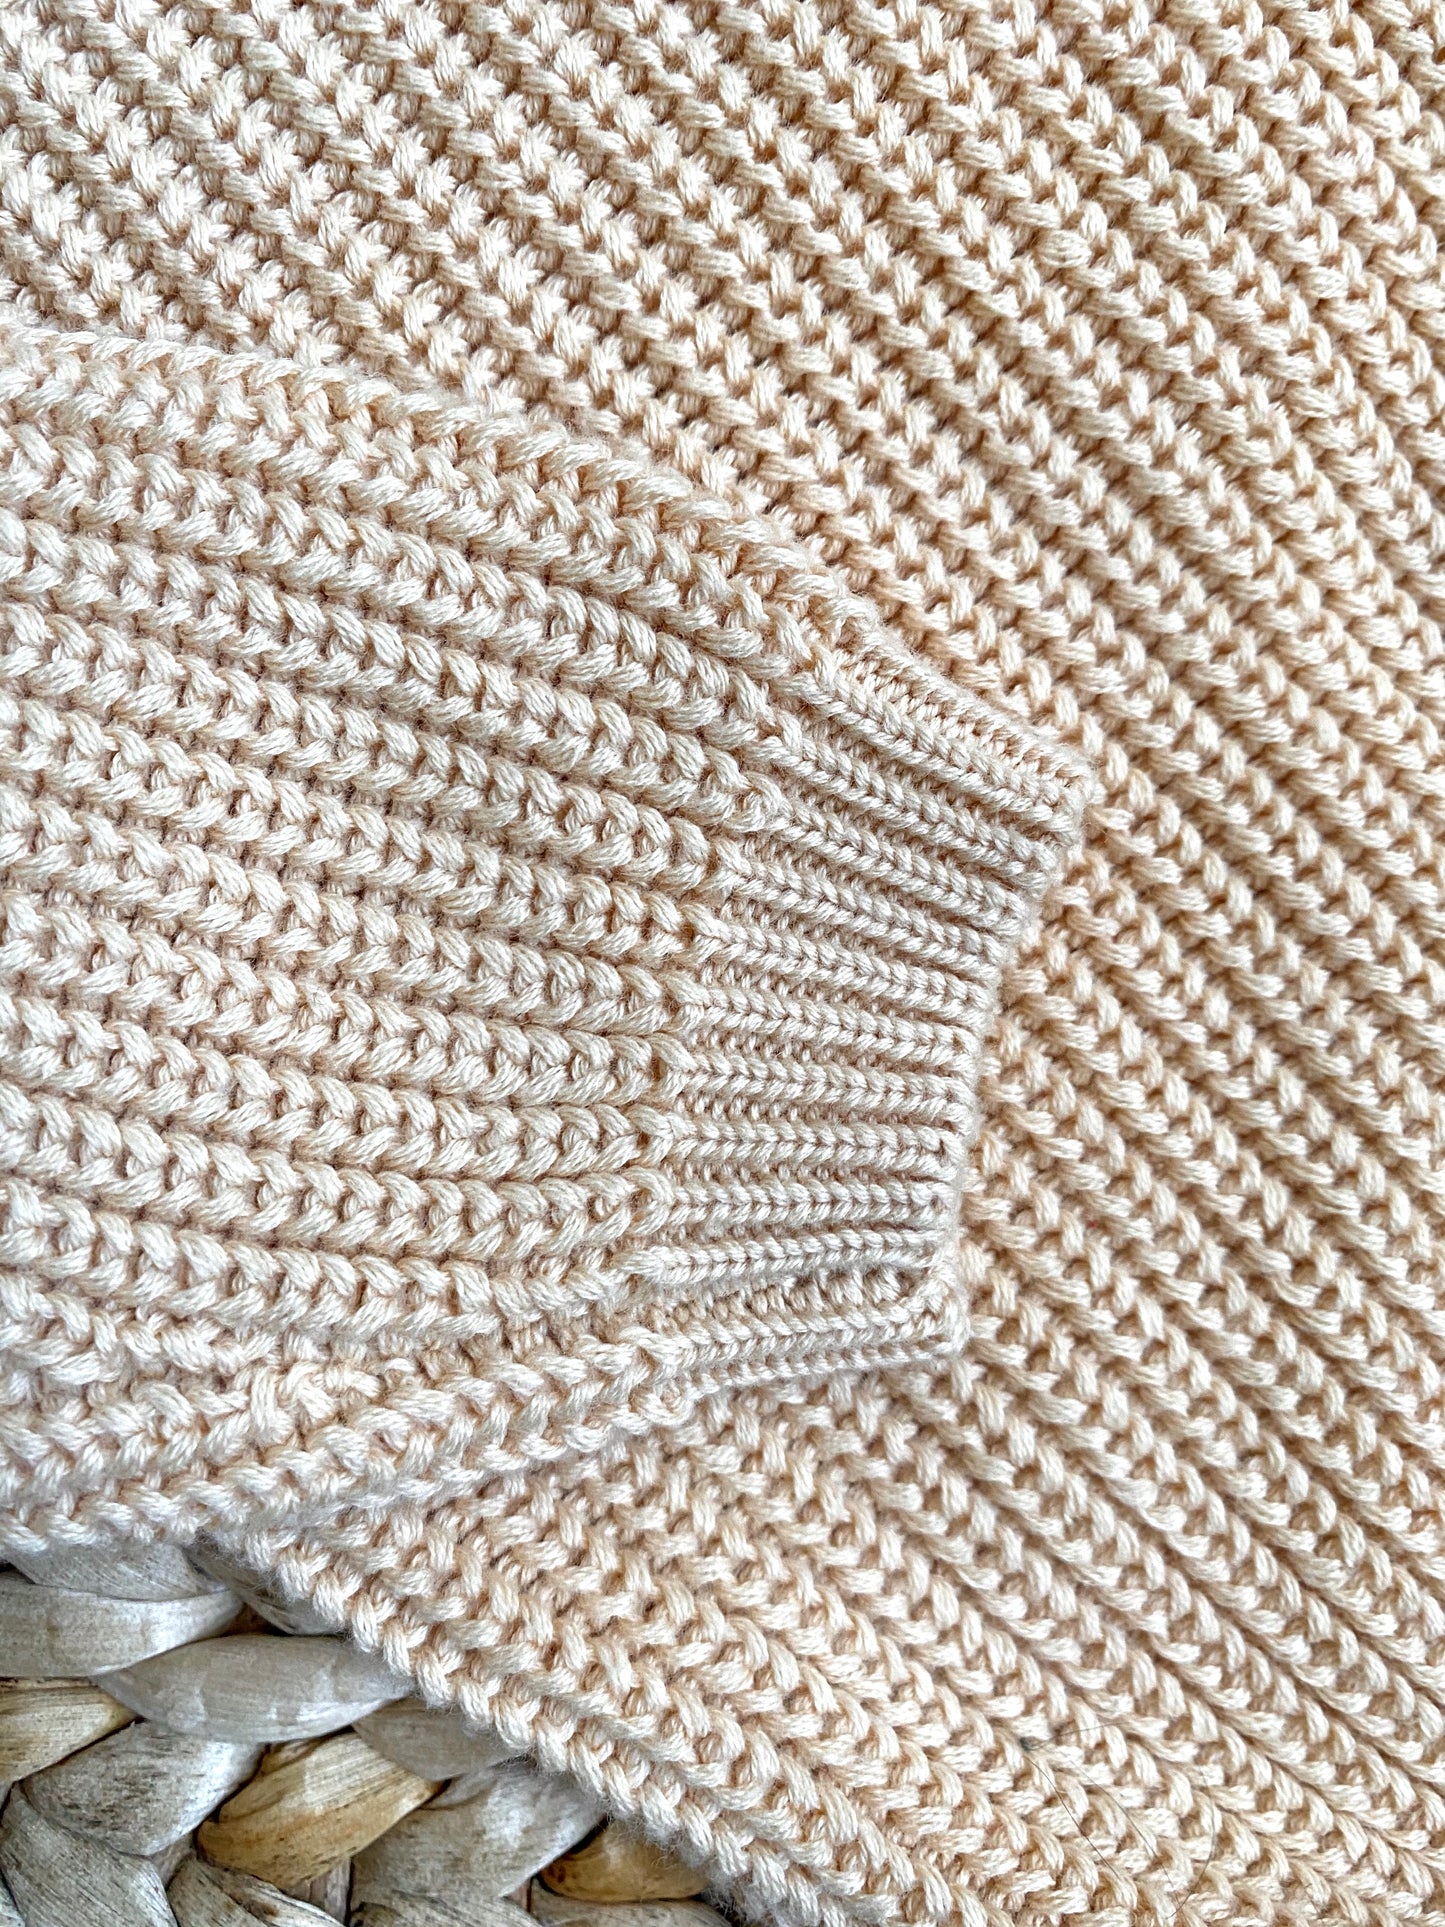 beige kids ribbed sweater for baby and toddler girls